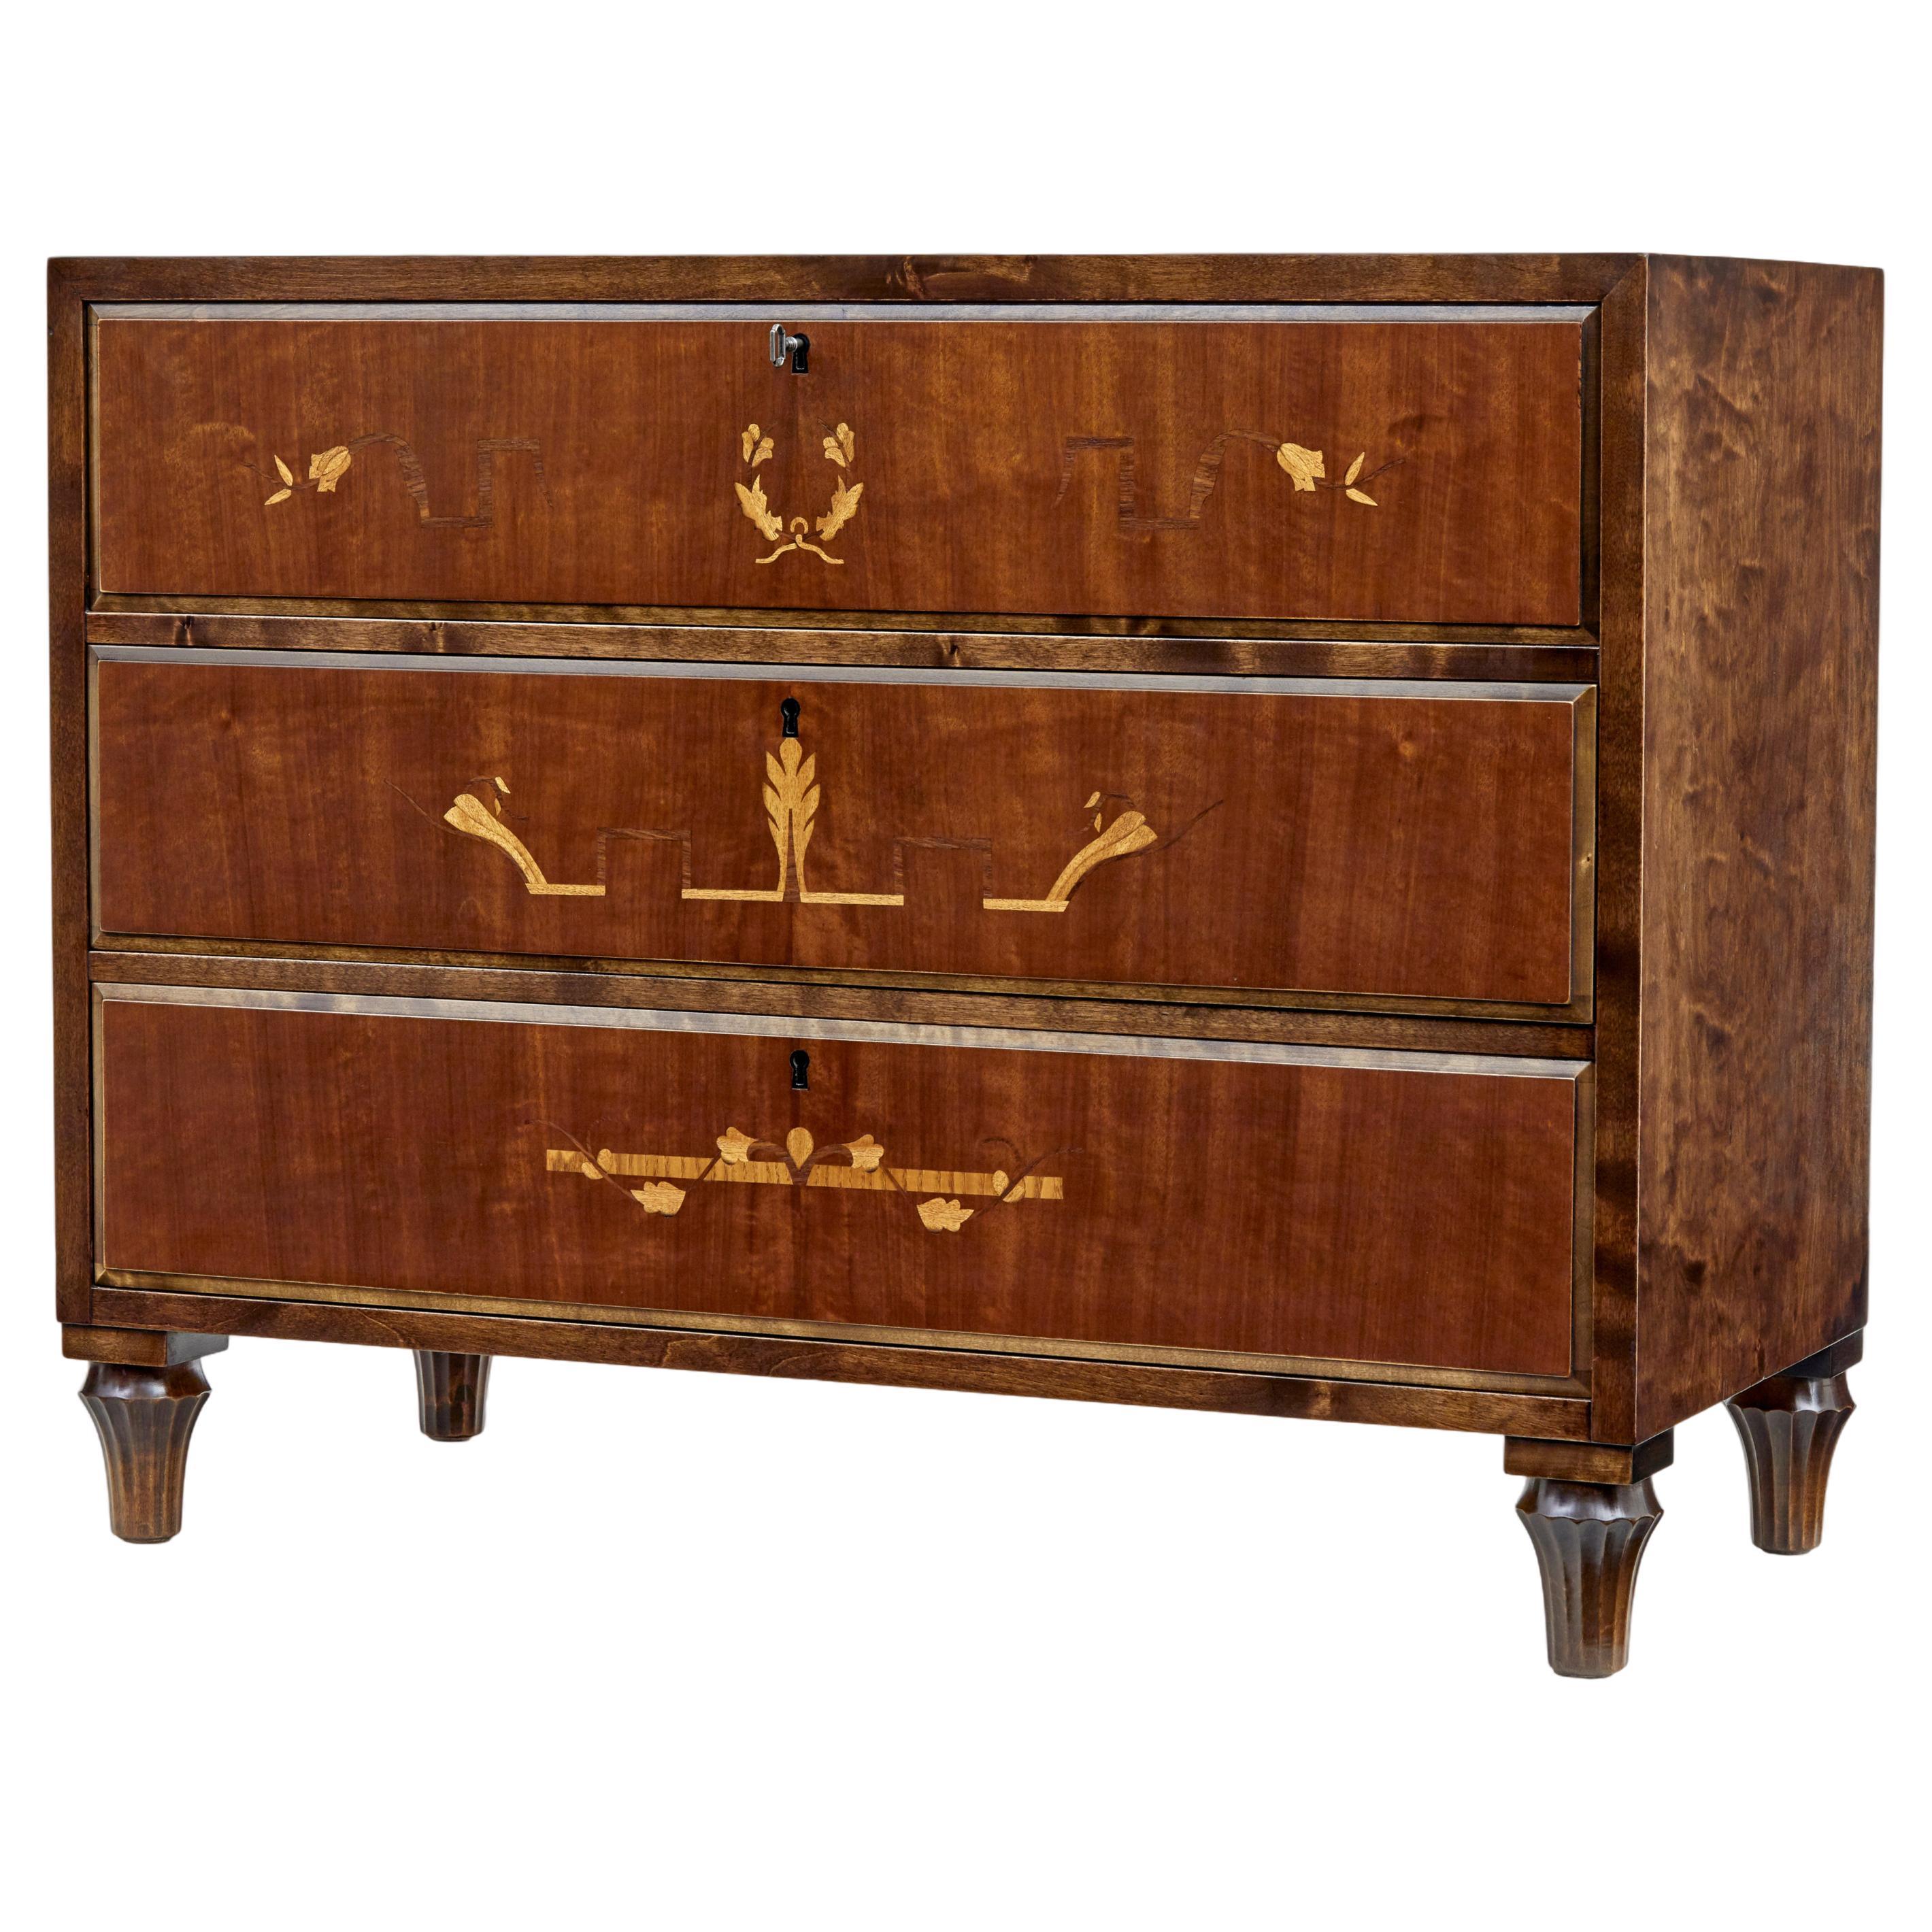 Swedish art deco inlaid birch chest of drawers For Sale